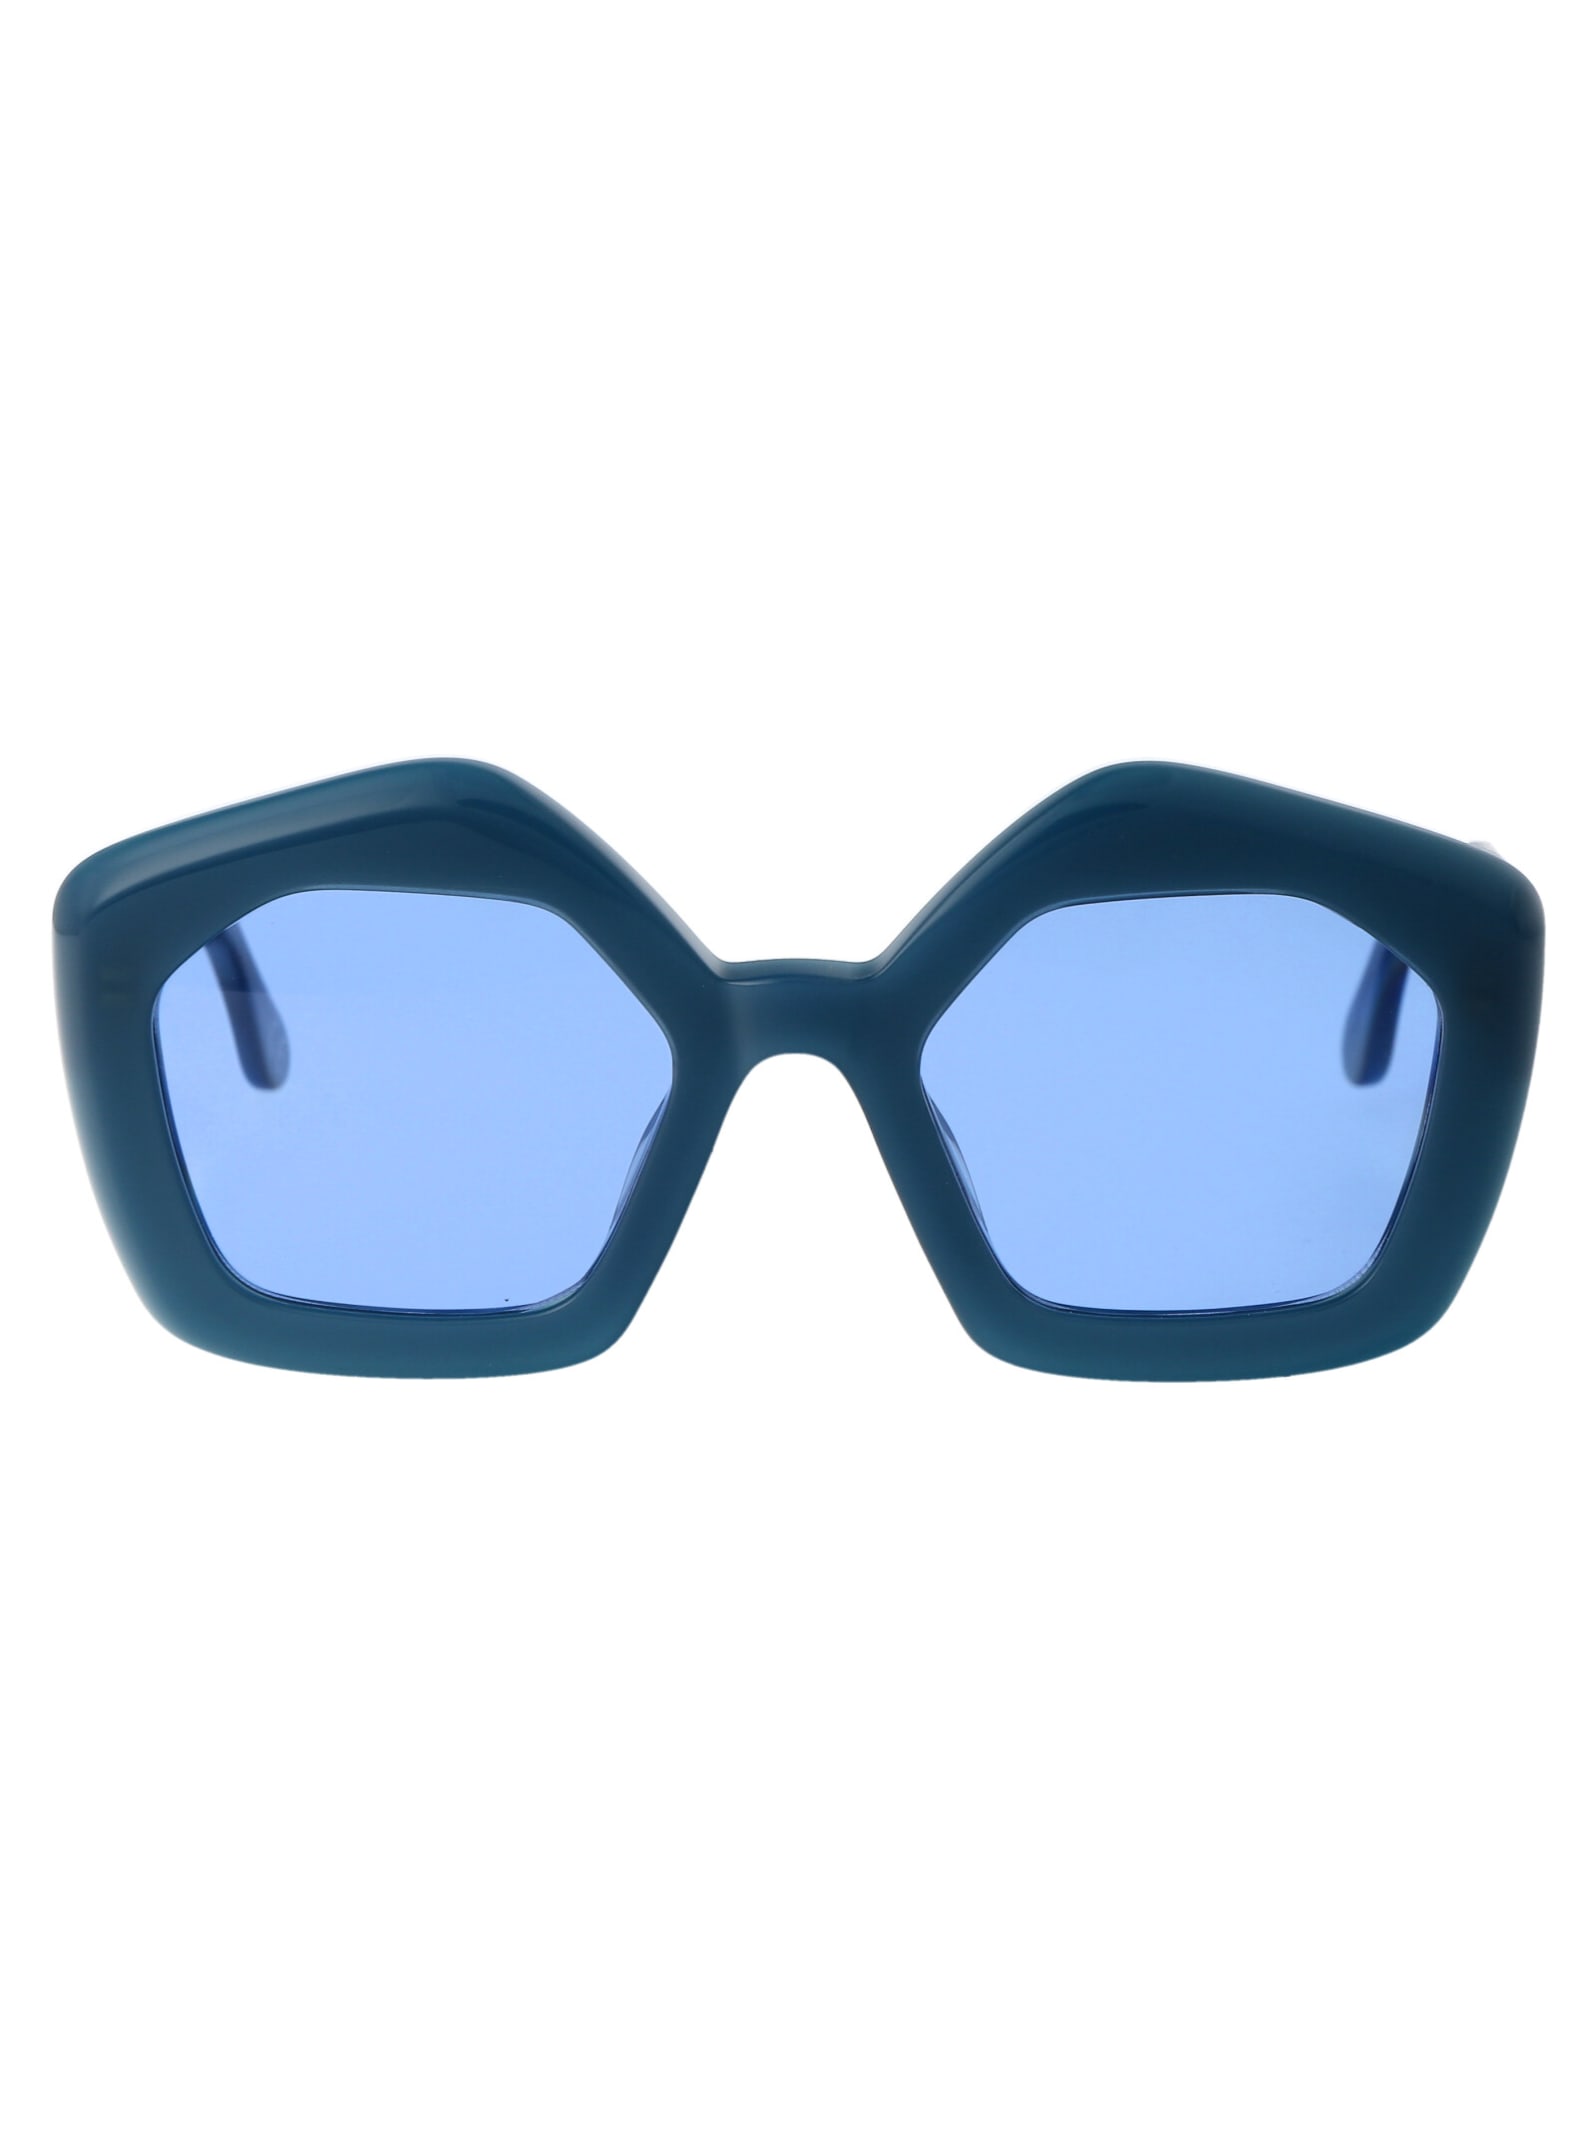 Laughing Waters Sunglasses